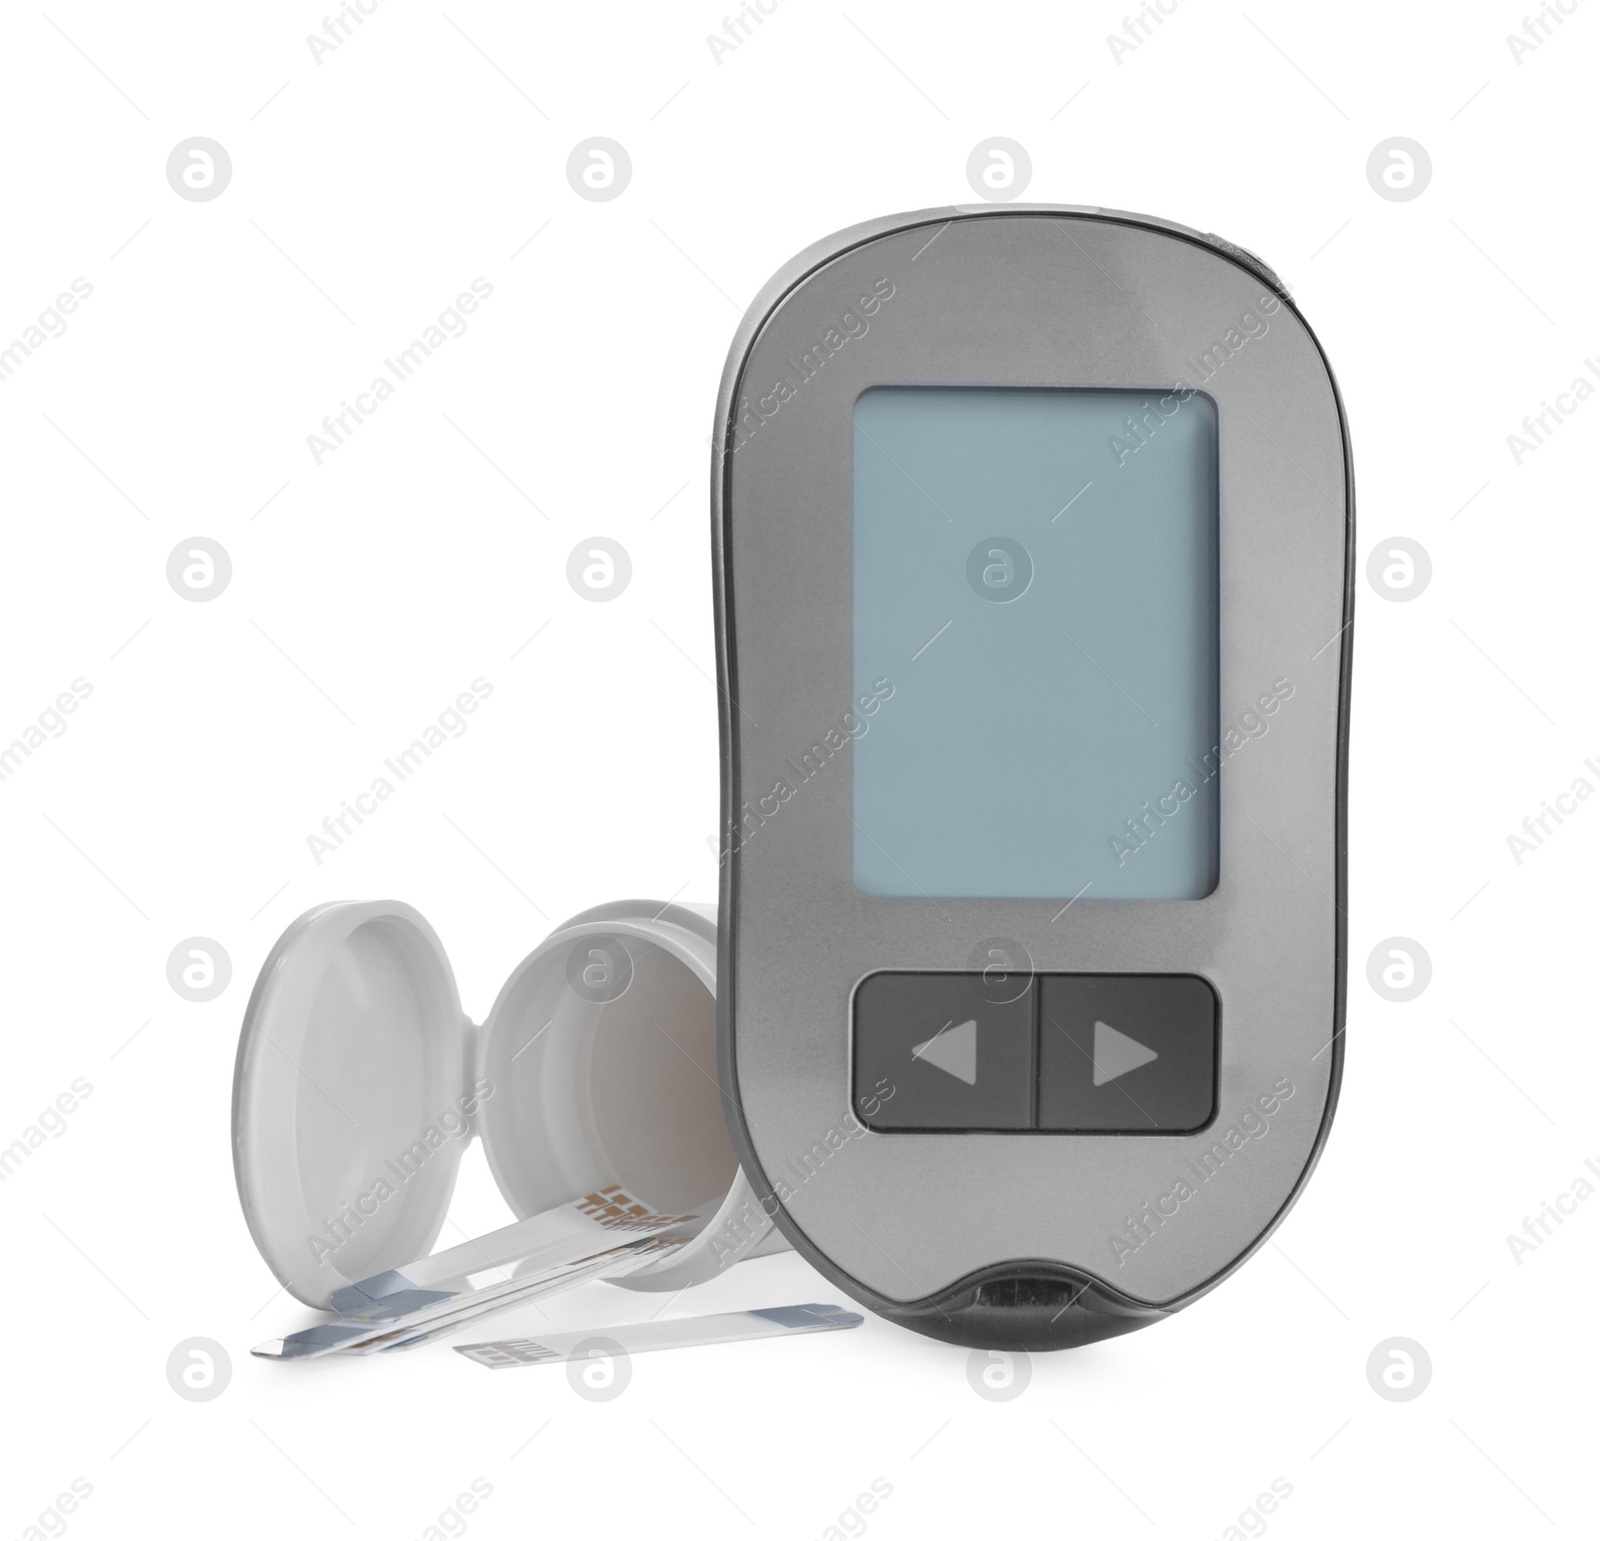 Photo of Glucometer and bottle with strips on white background. Diabetes testing kit